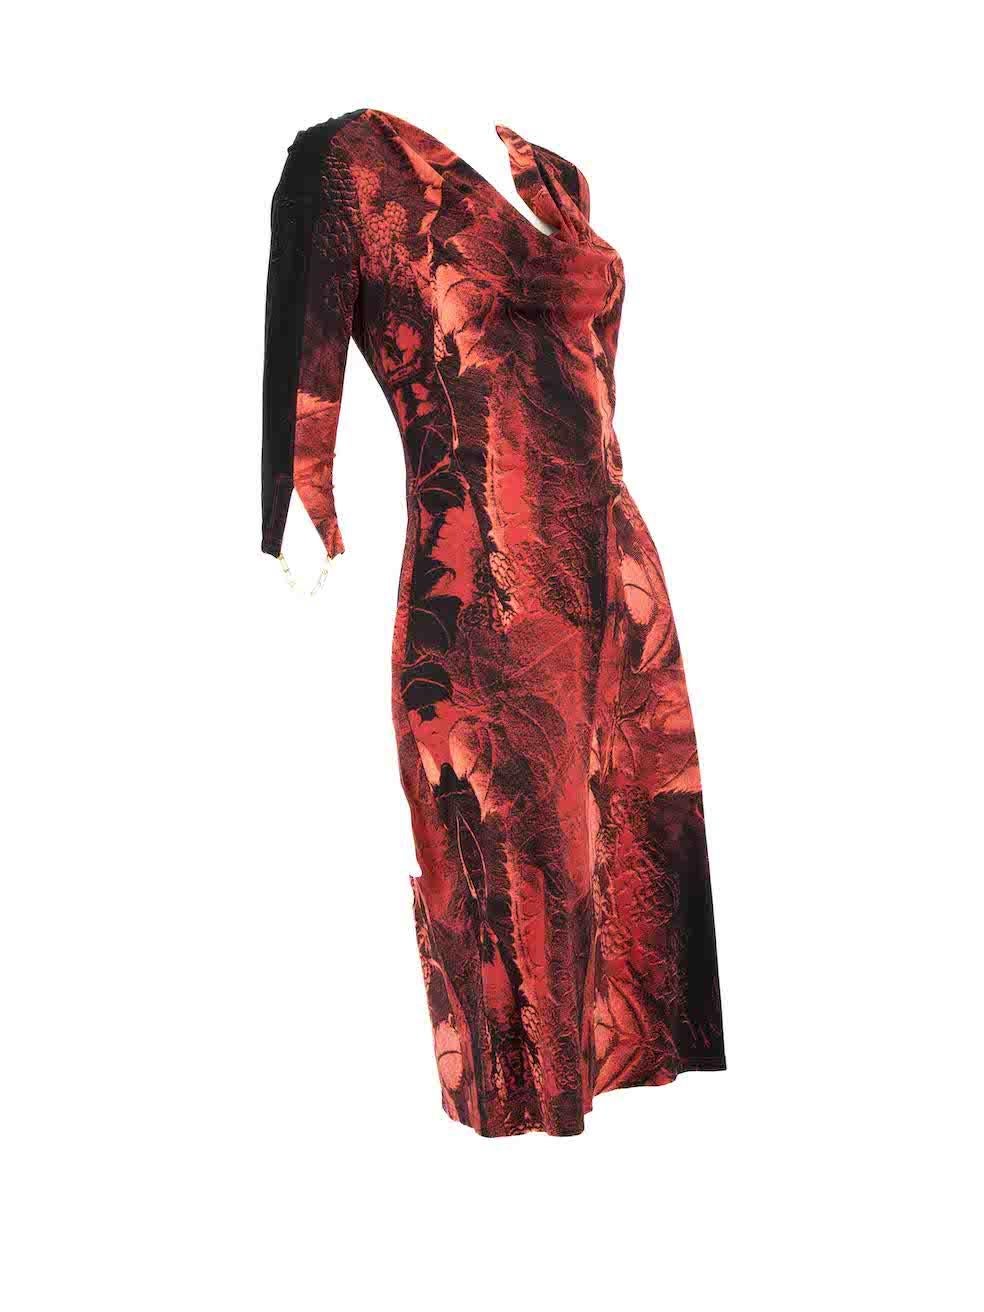 CONDITION is Very good. Hardly any visible wear to dress is evident on this used Roberto Cavalli designer resale item.
 
 
 
 Details
 
 
 Multicolour- Red and black tone
 
 Synthetic
 
 Knee length dress
 
 Printed pattern
 
 Bodycon and stretchy
